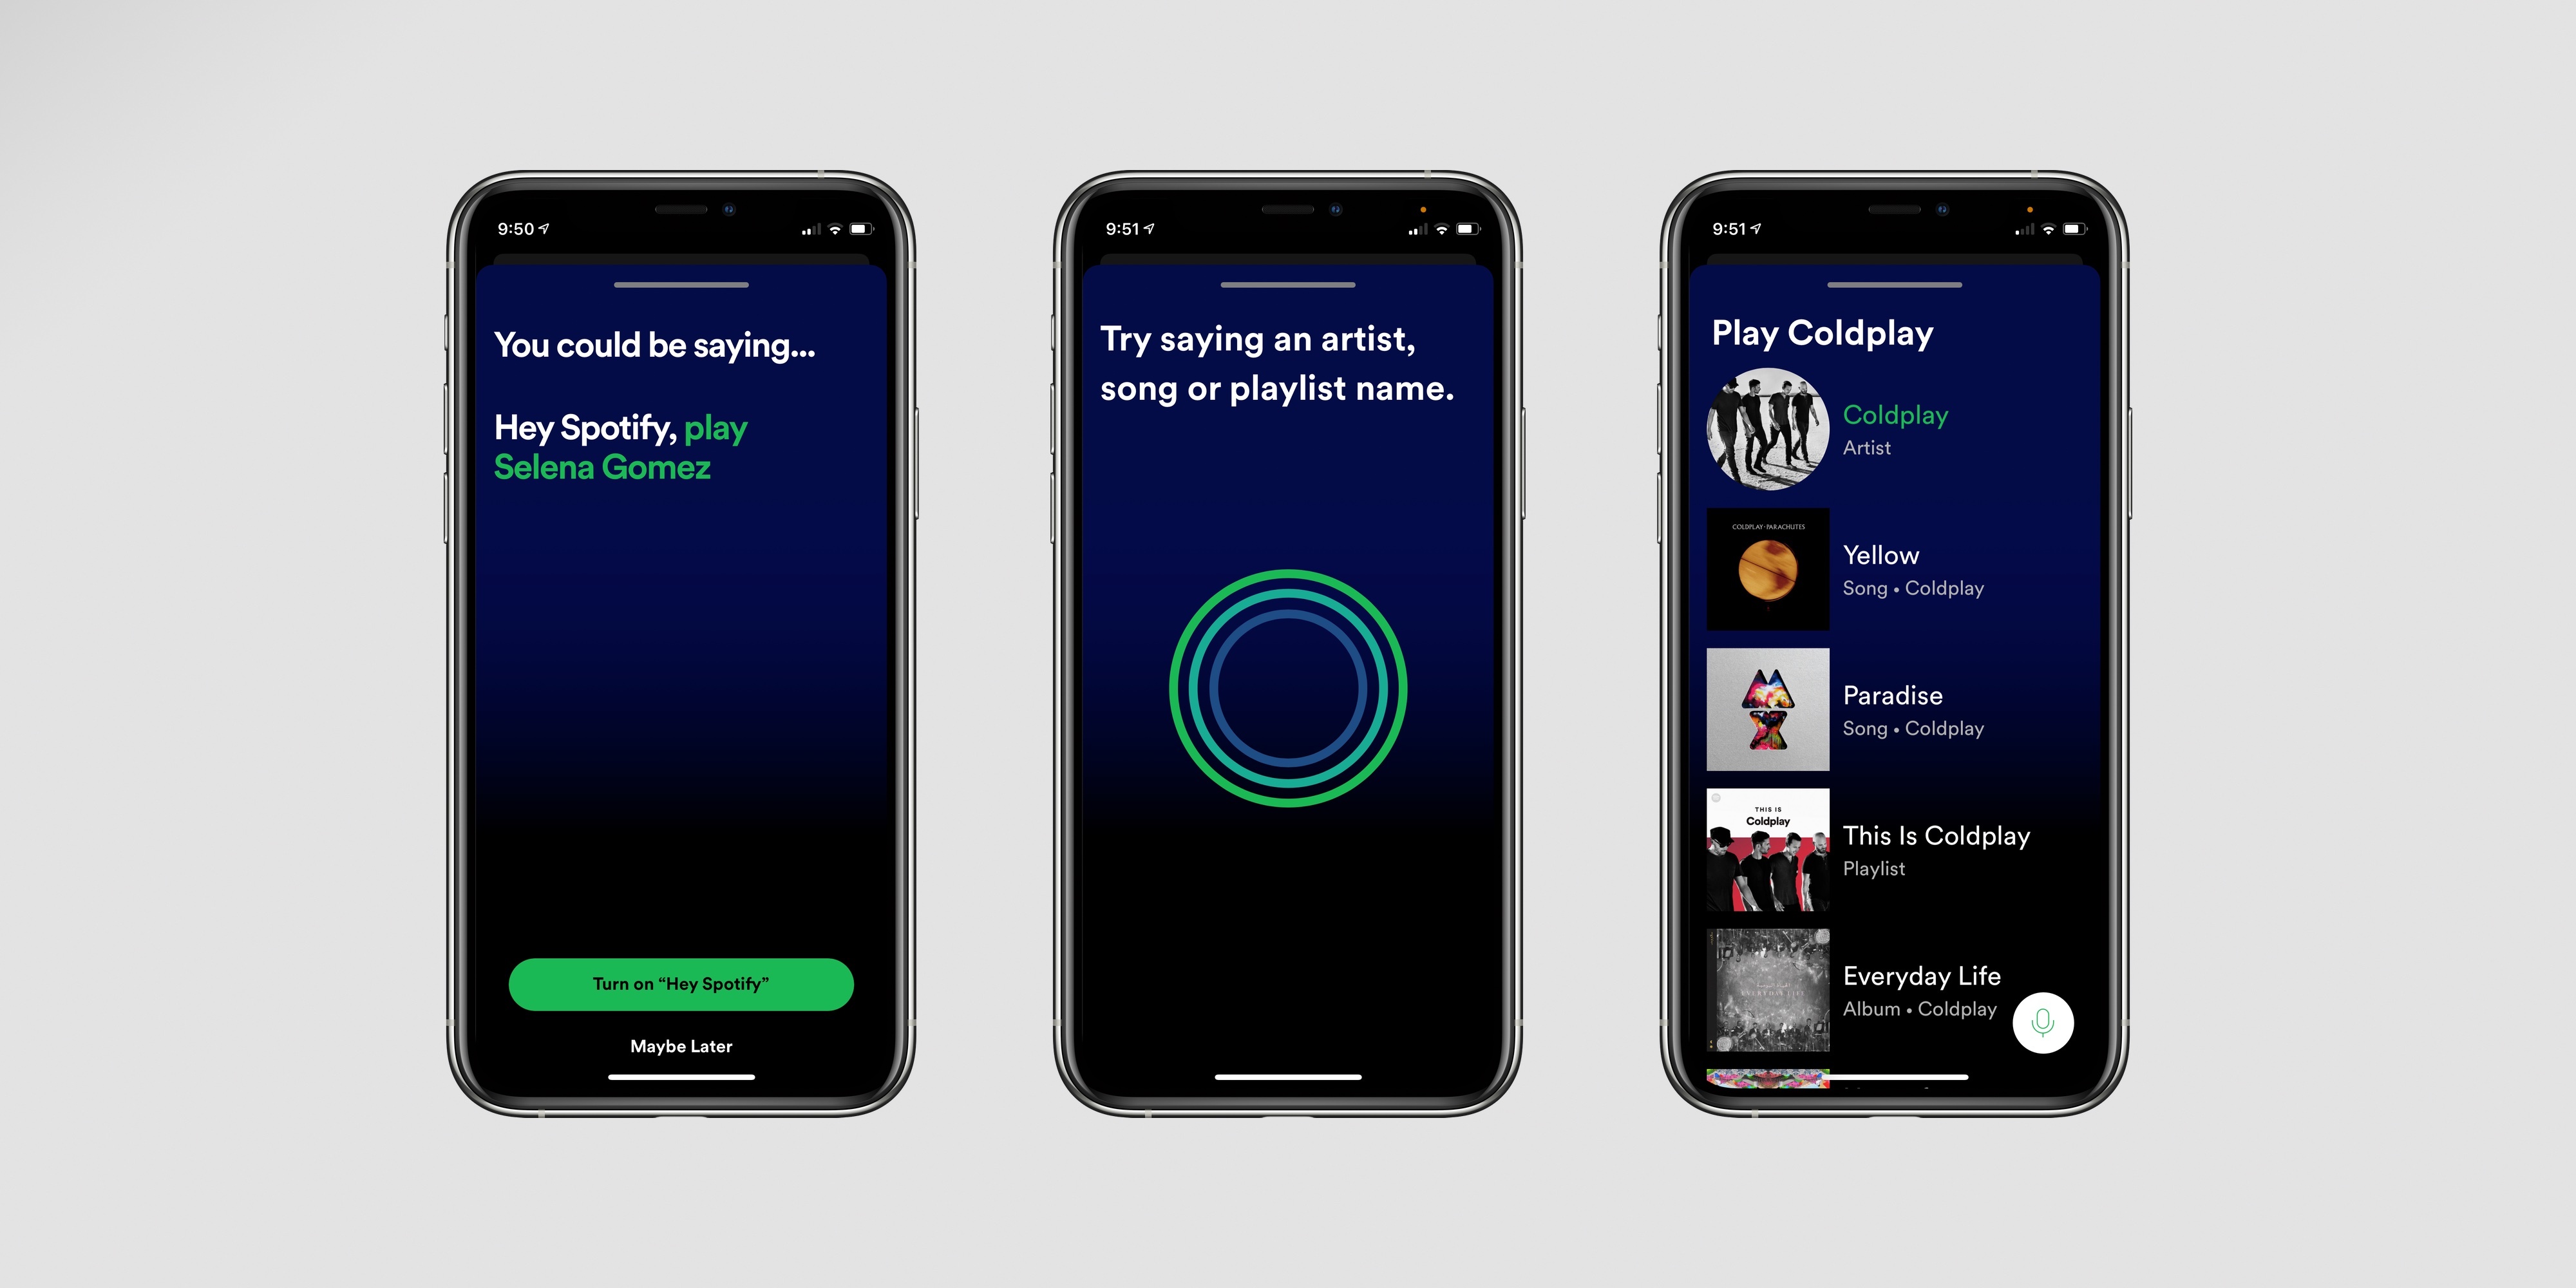 Spotify rolls out hands-free 'Hey Spotify' voice controls on